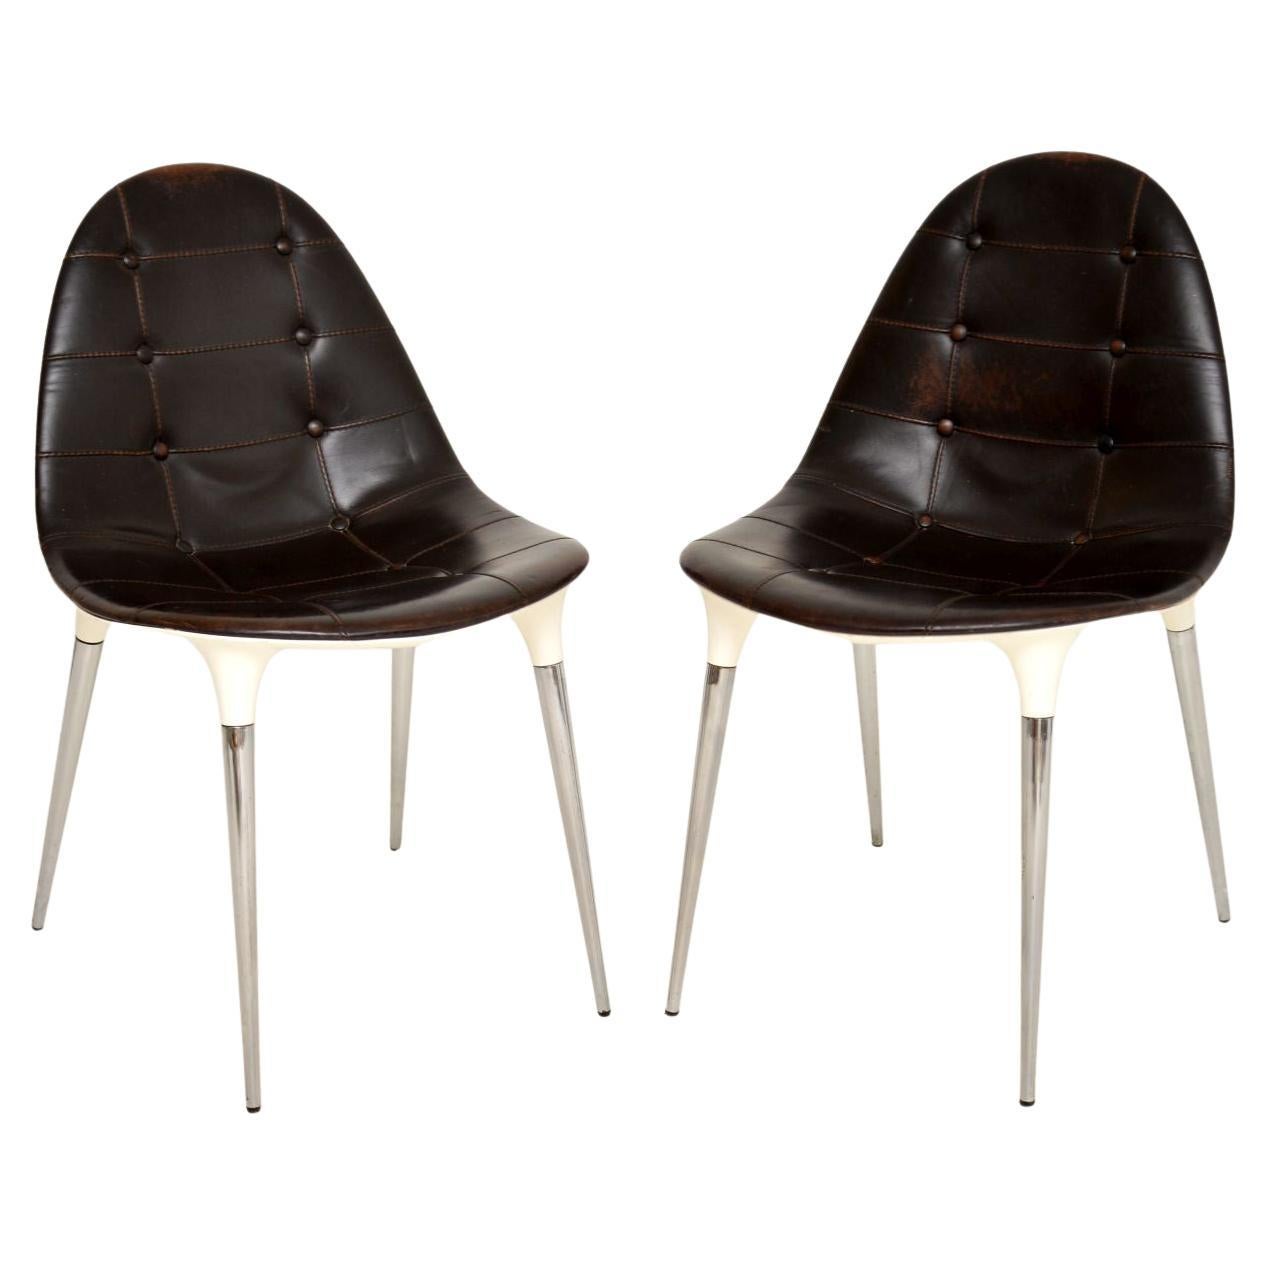 Pair of Caprice Dining / Side Chairs by Philippe Starck for Cassina